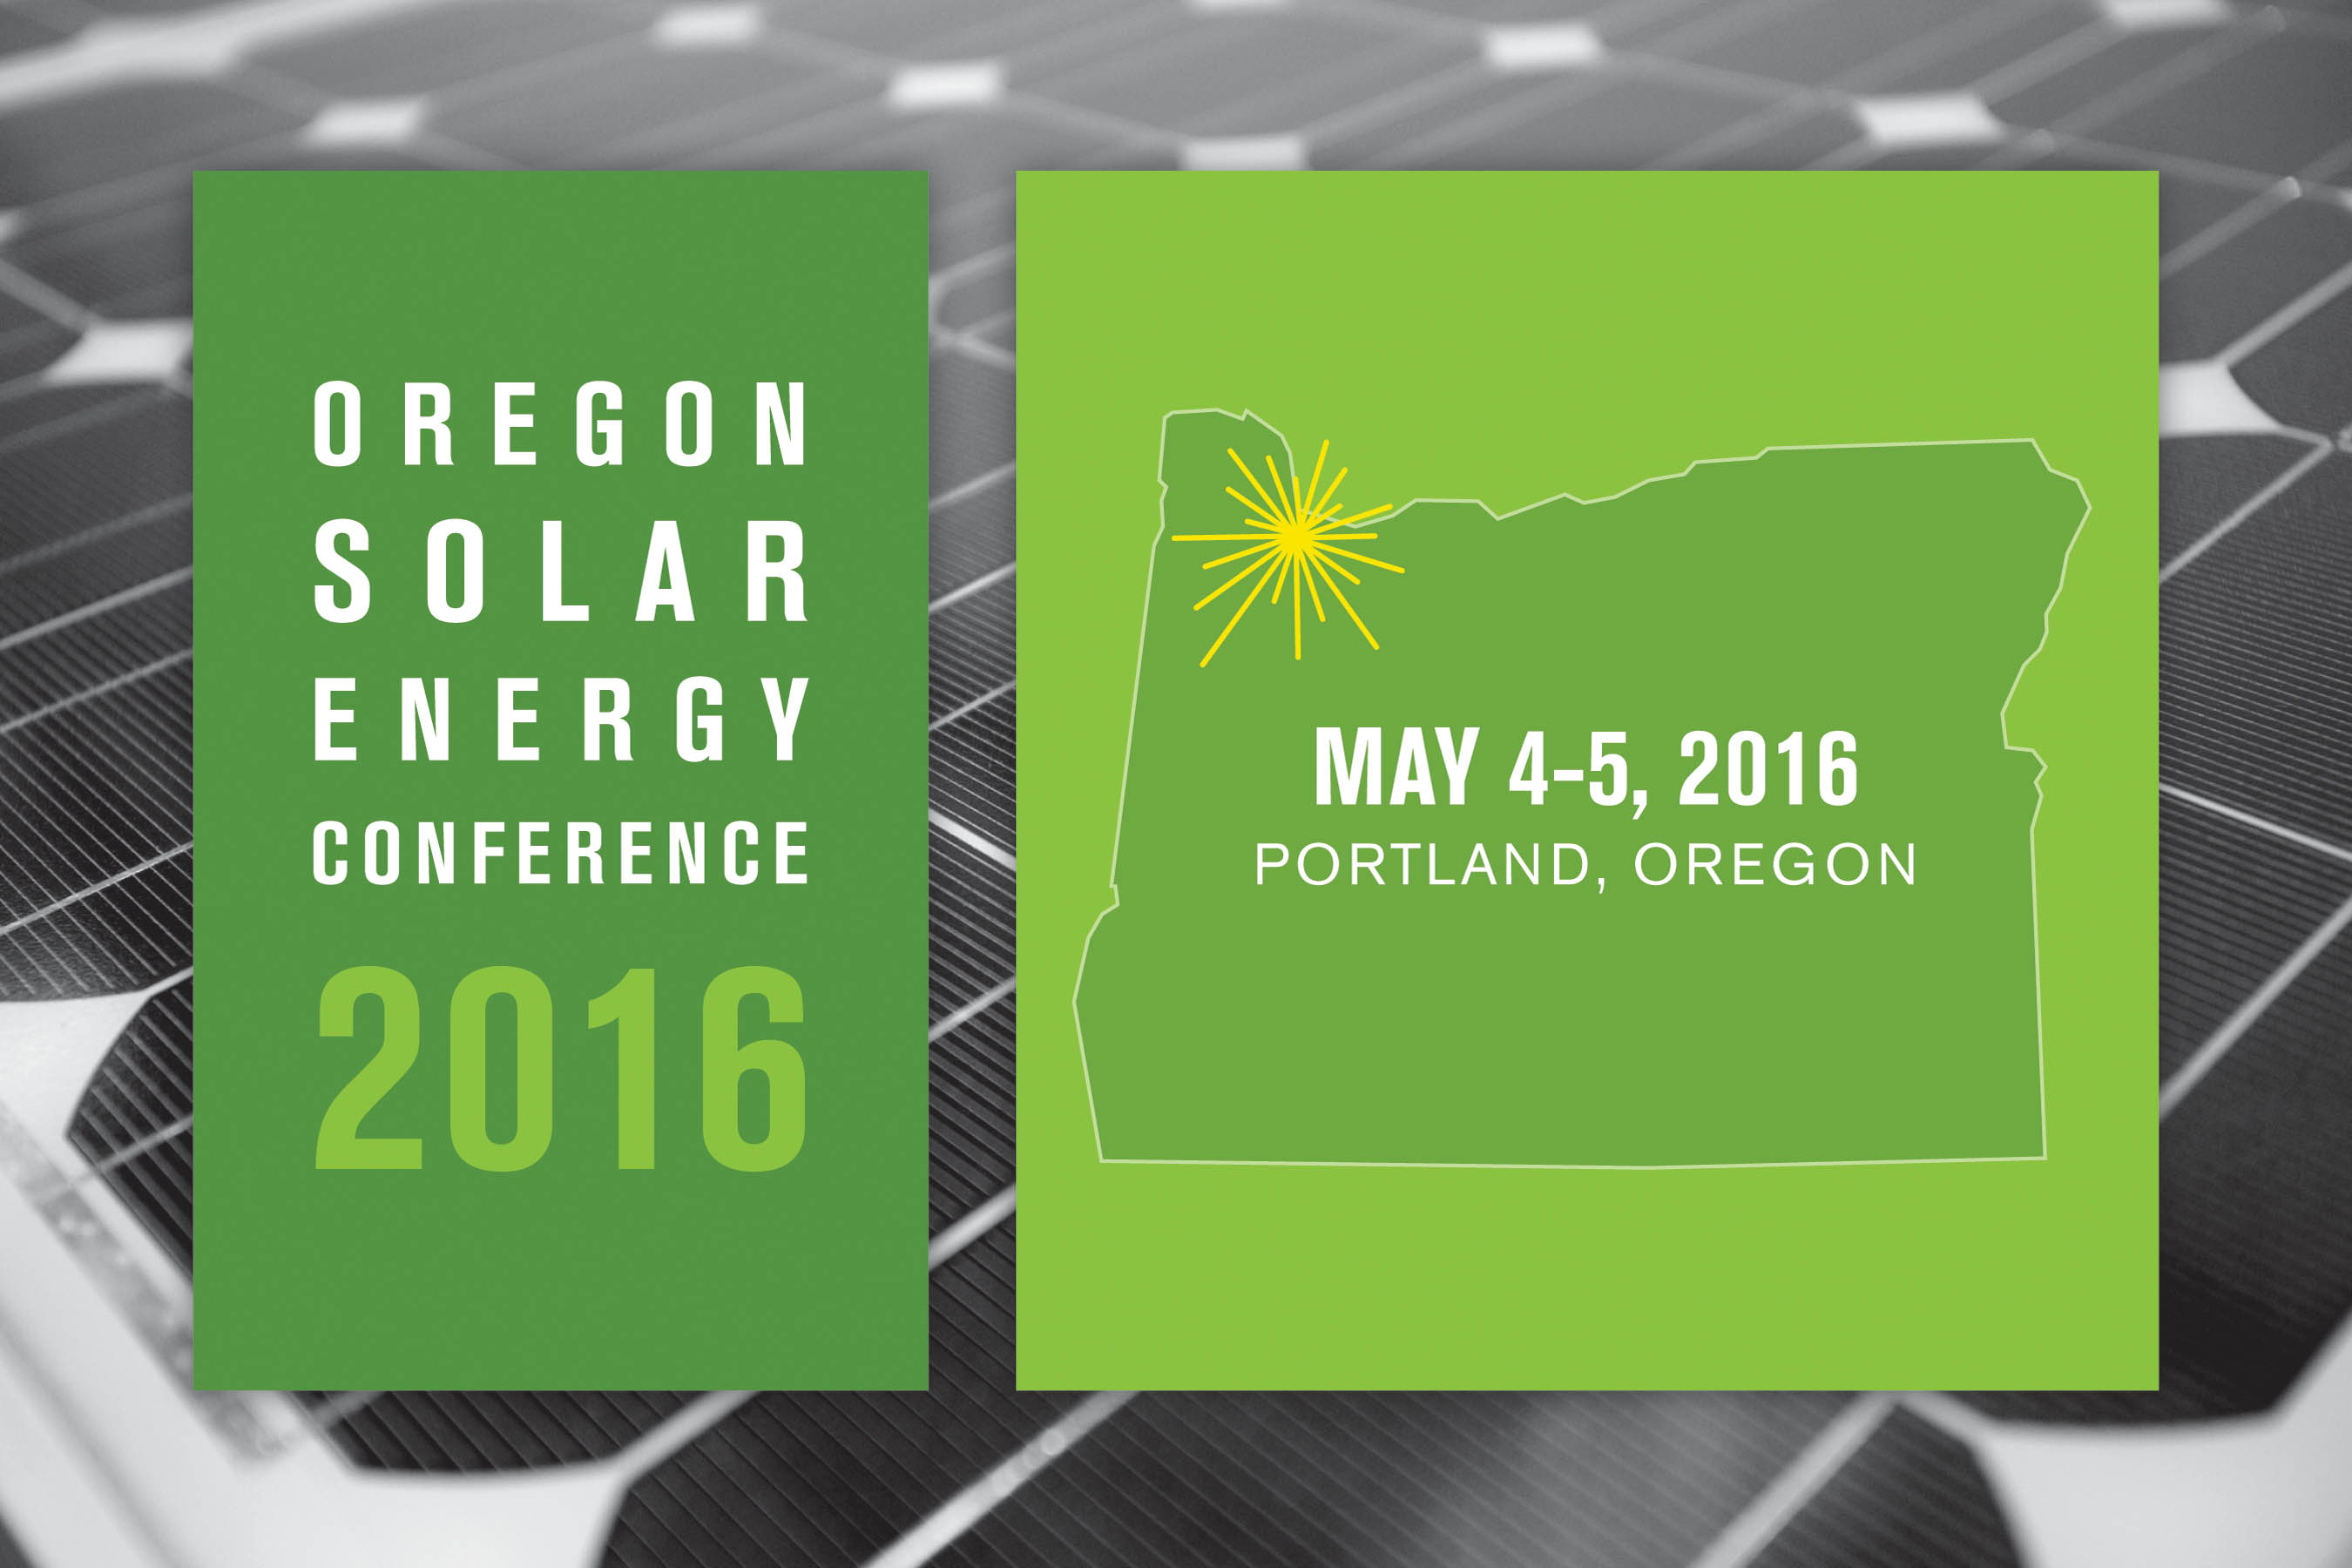 Oregon Solar Energy Conference, May 4-5, 2016